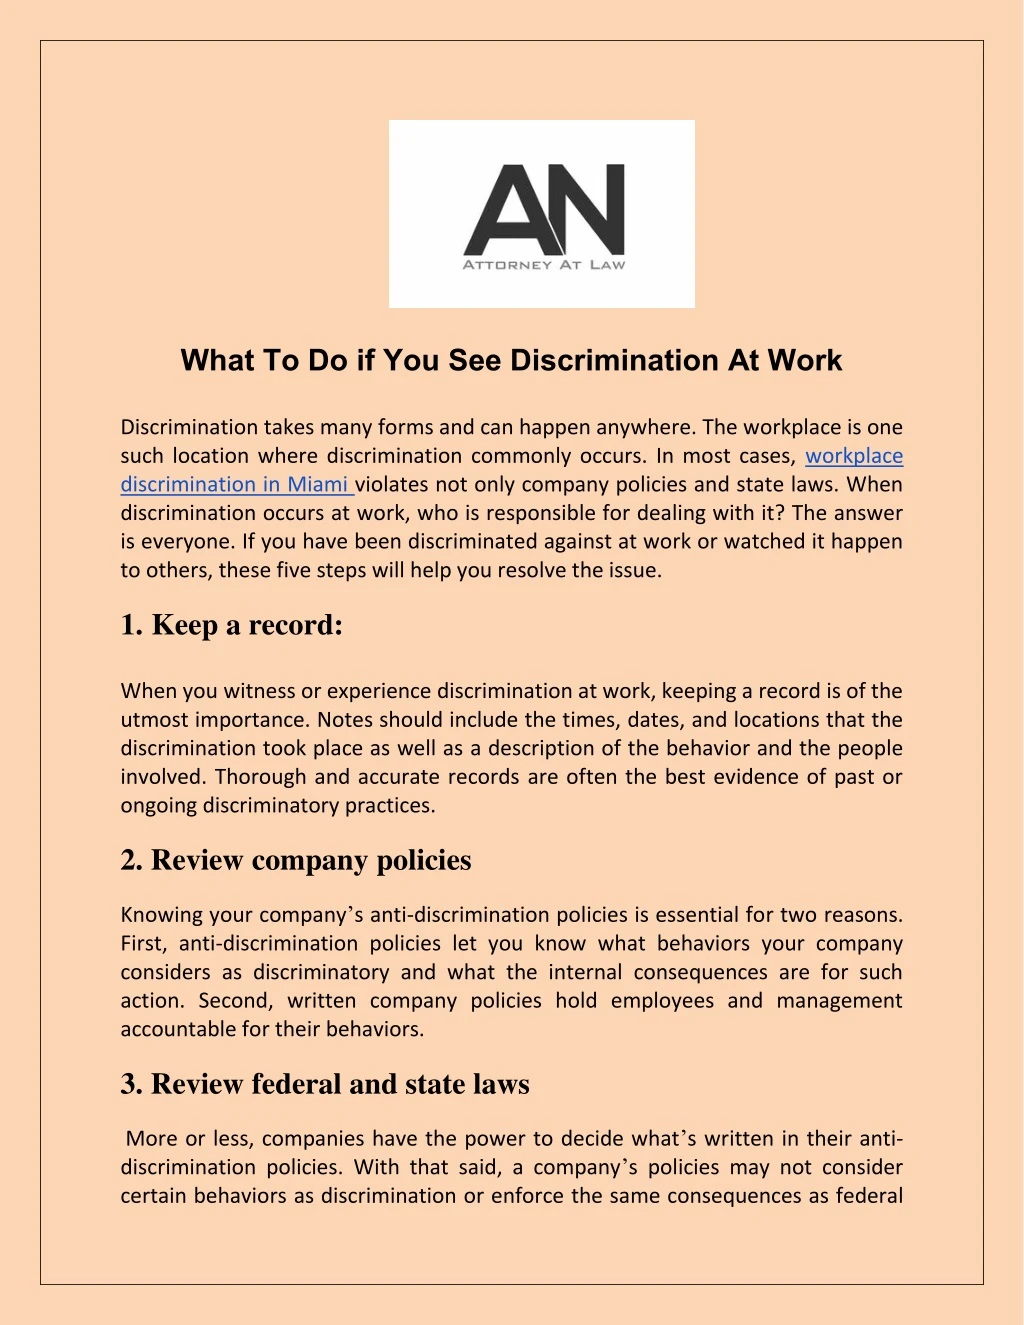 what to do if you see discrimination at work